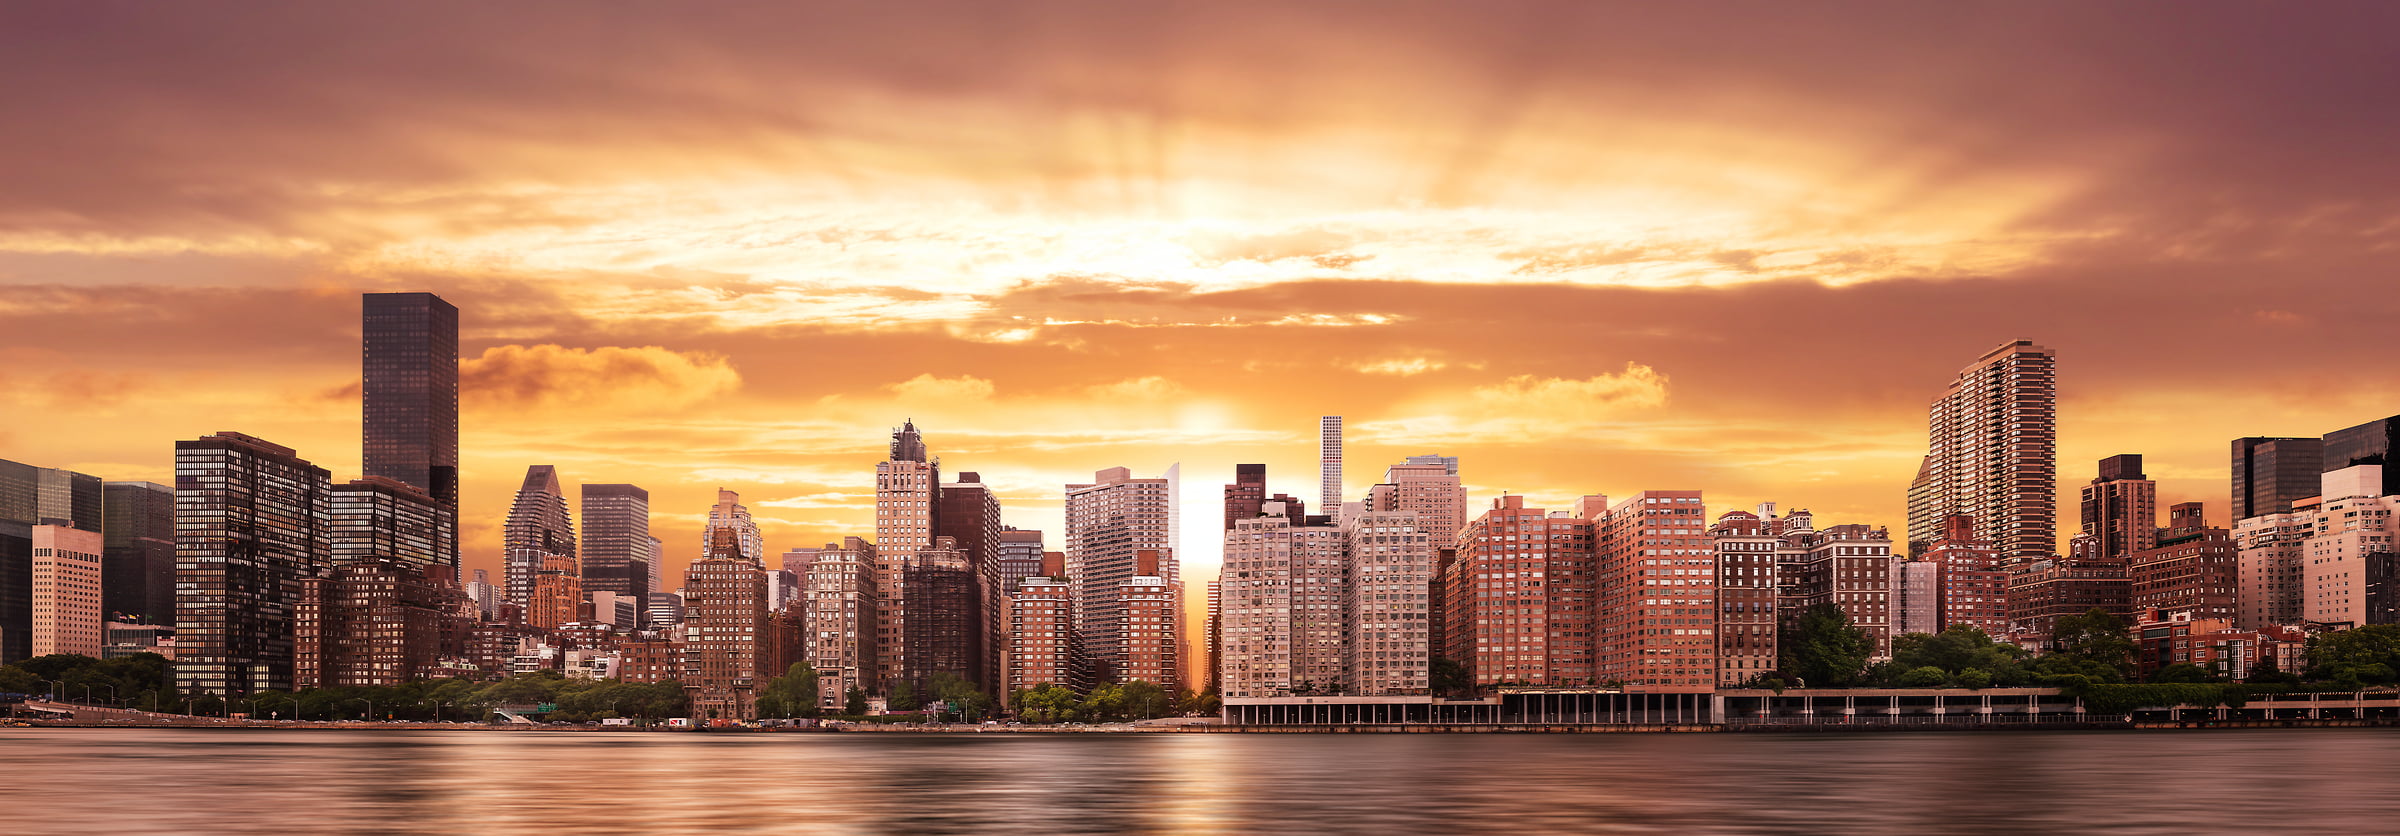 2,369 megapixels! A very high definition cityscape VAST photo of the midtown Manhattan city skyline and East River during a beautiful sunset in New York City; created by Dan Piech